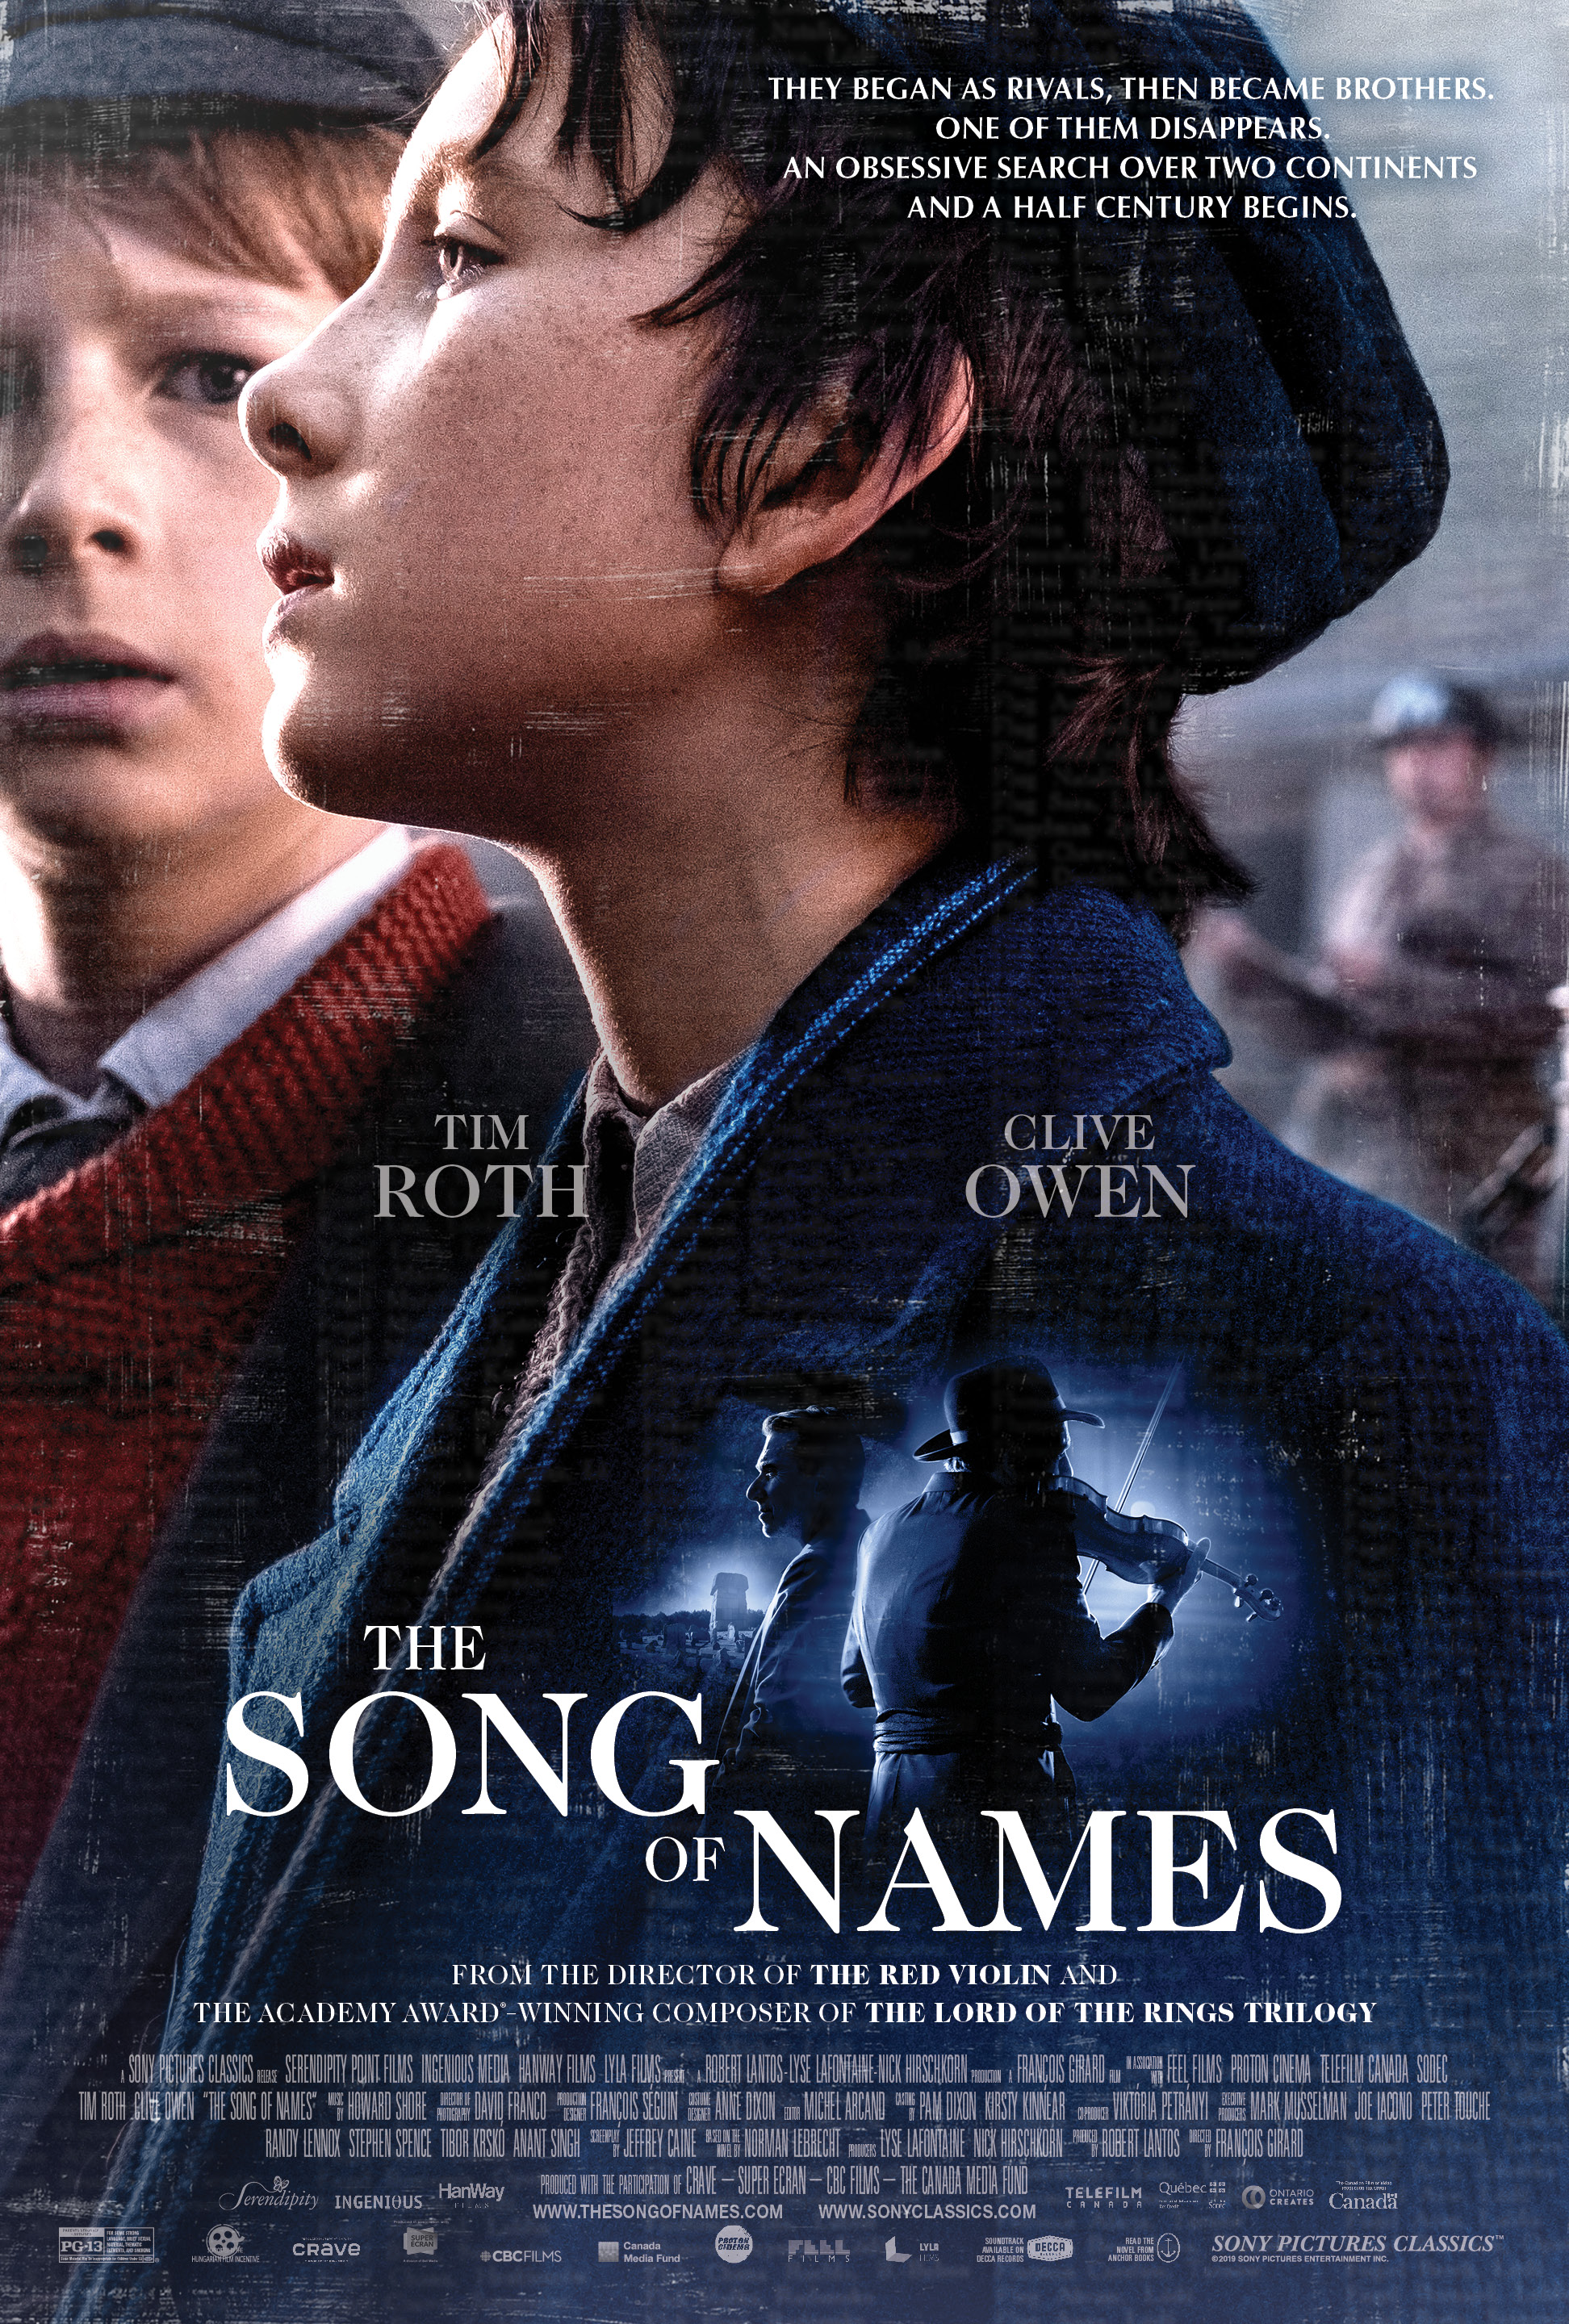 Poster for Film "Song of Names", two boys looking to the left, and an image of a man playing a violin